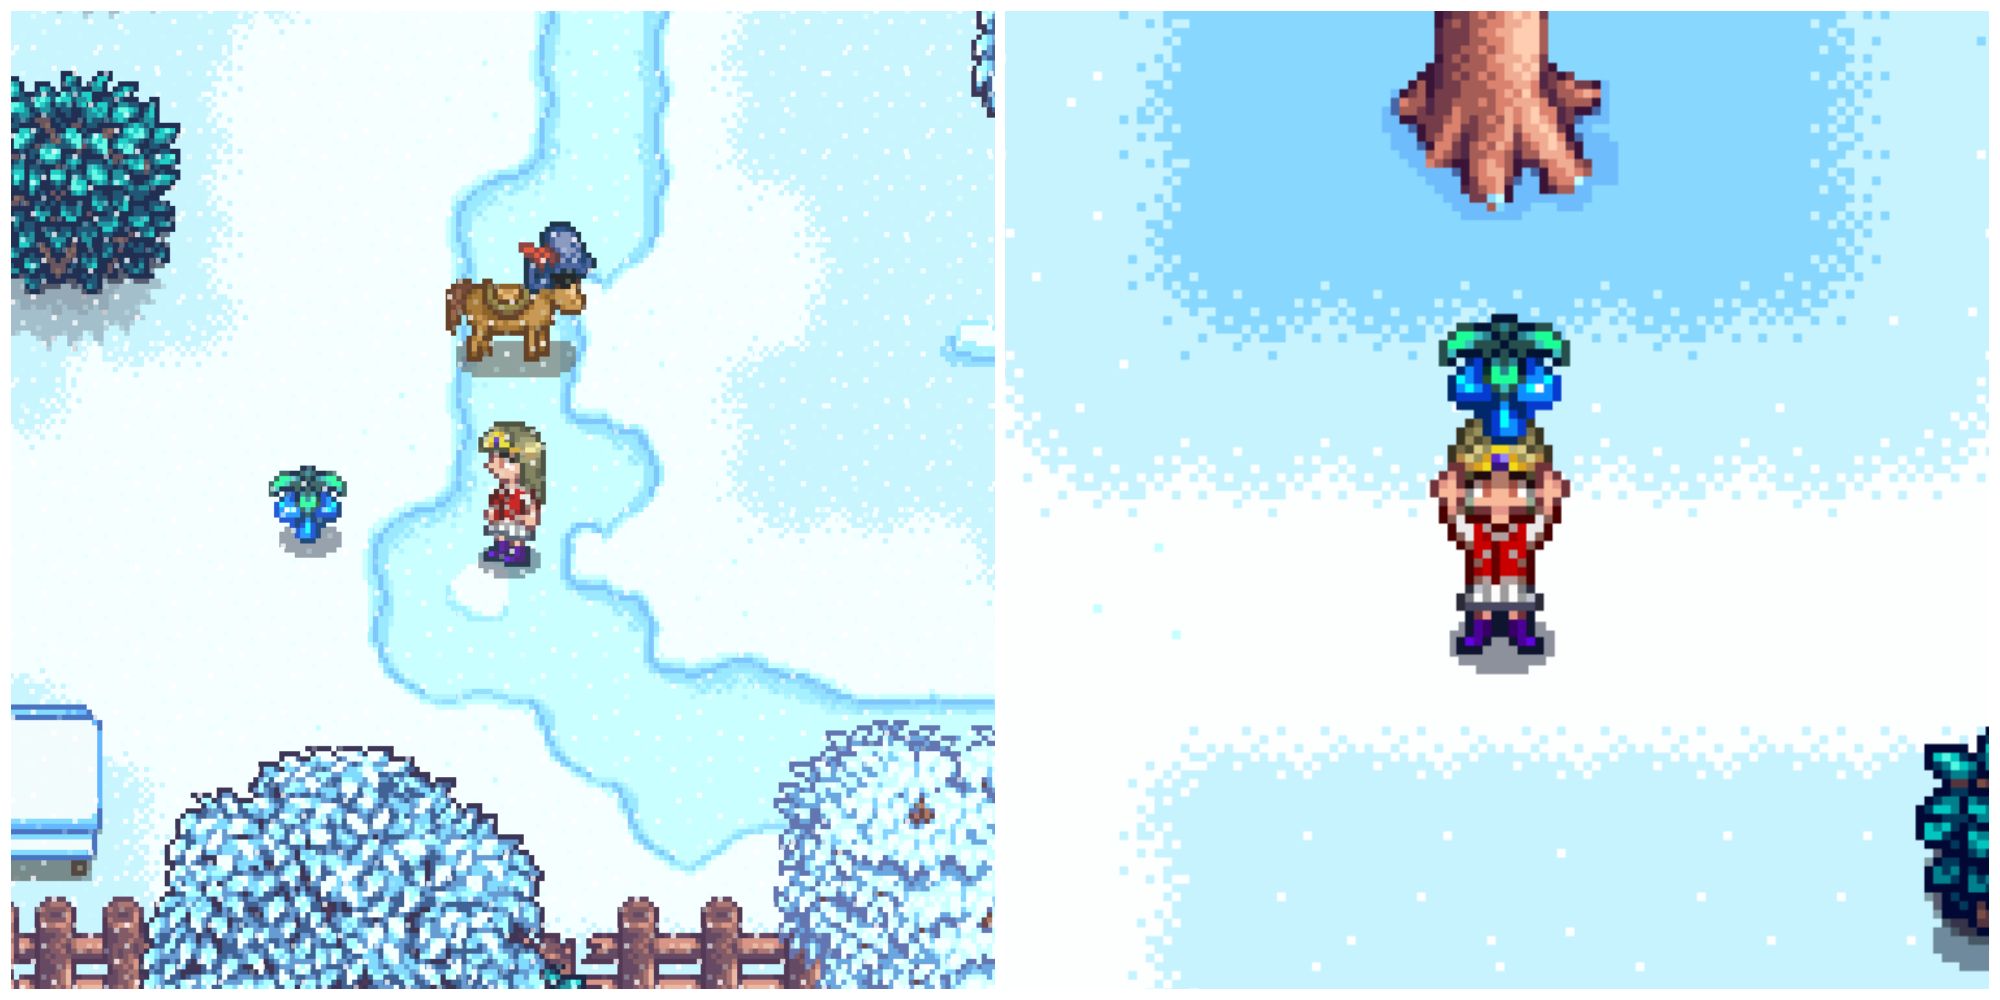 Split image of a character finding a Crystal Fruit while foraging and a character holding a Crystal Fruit in Stardew Valley